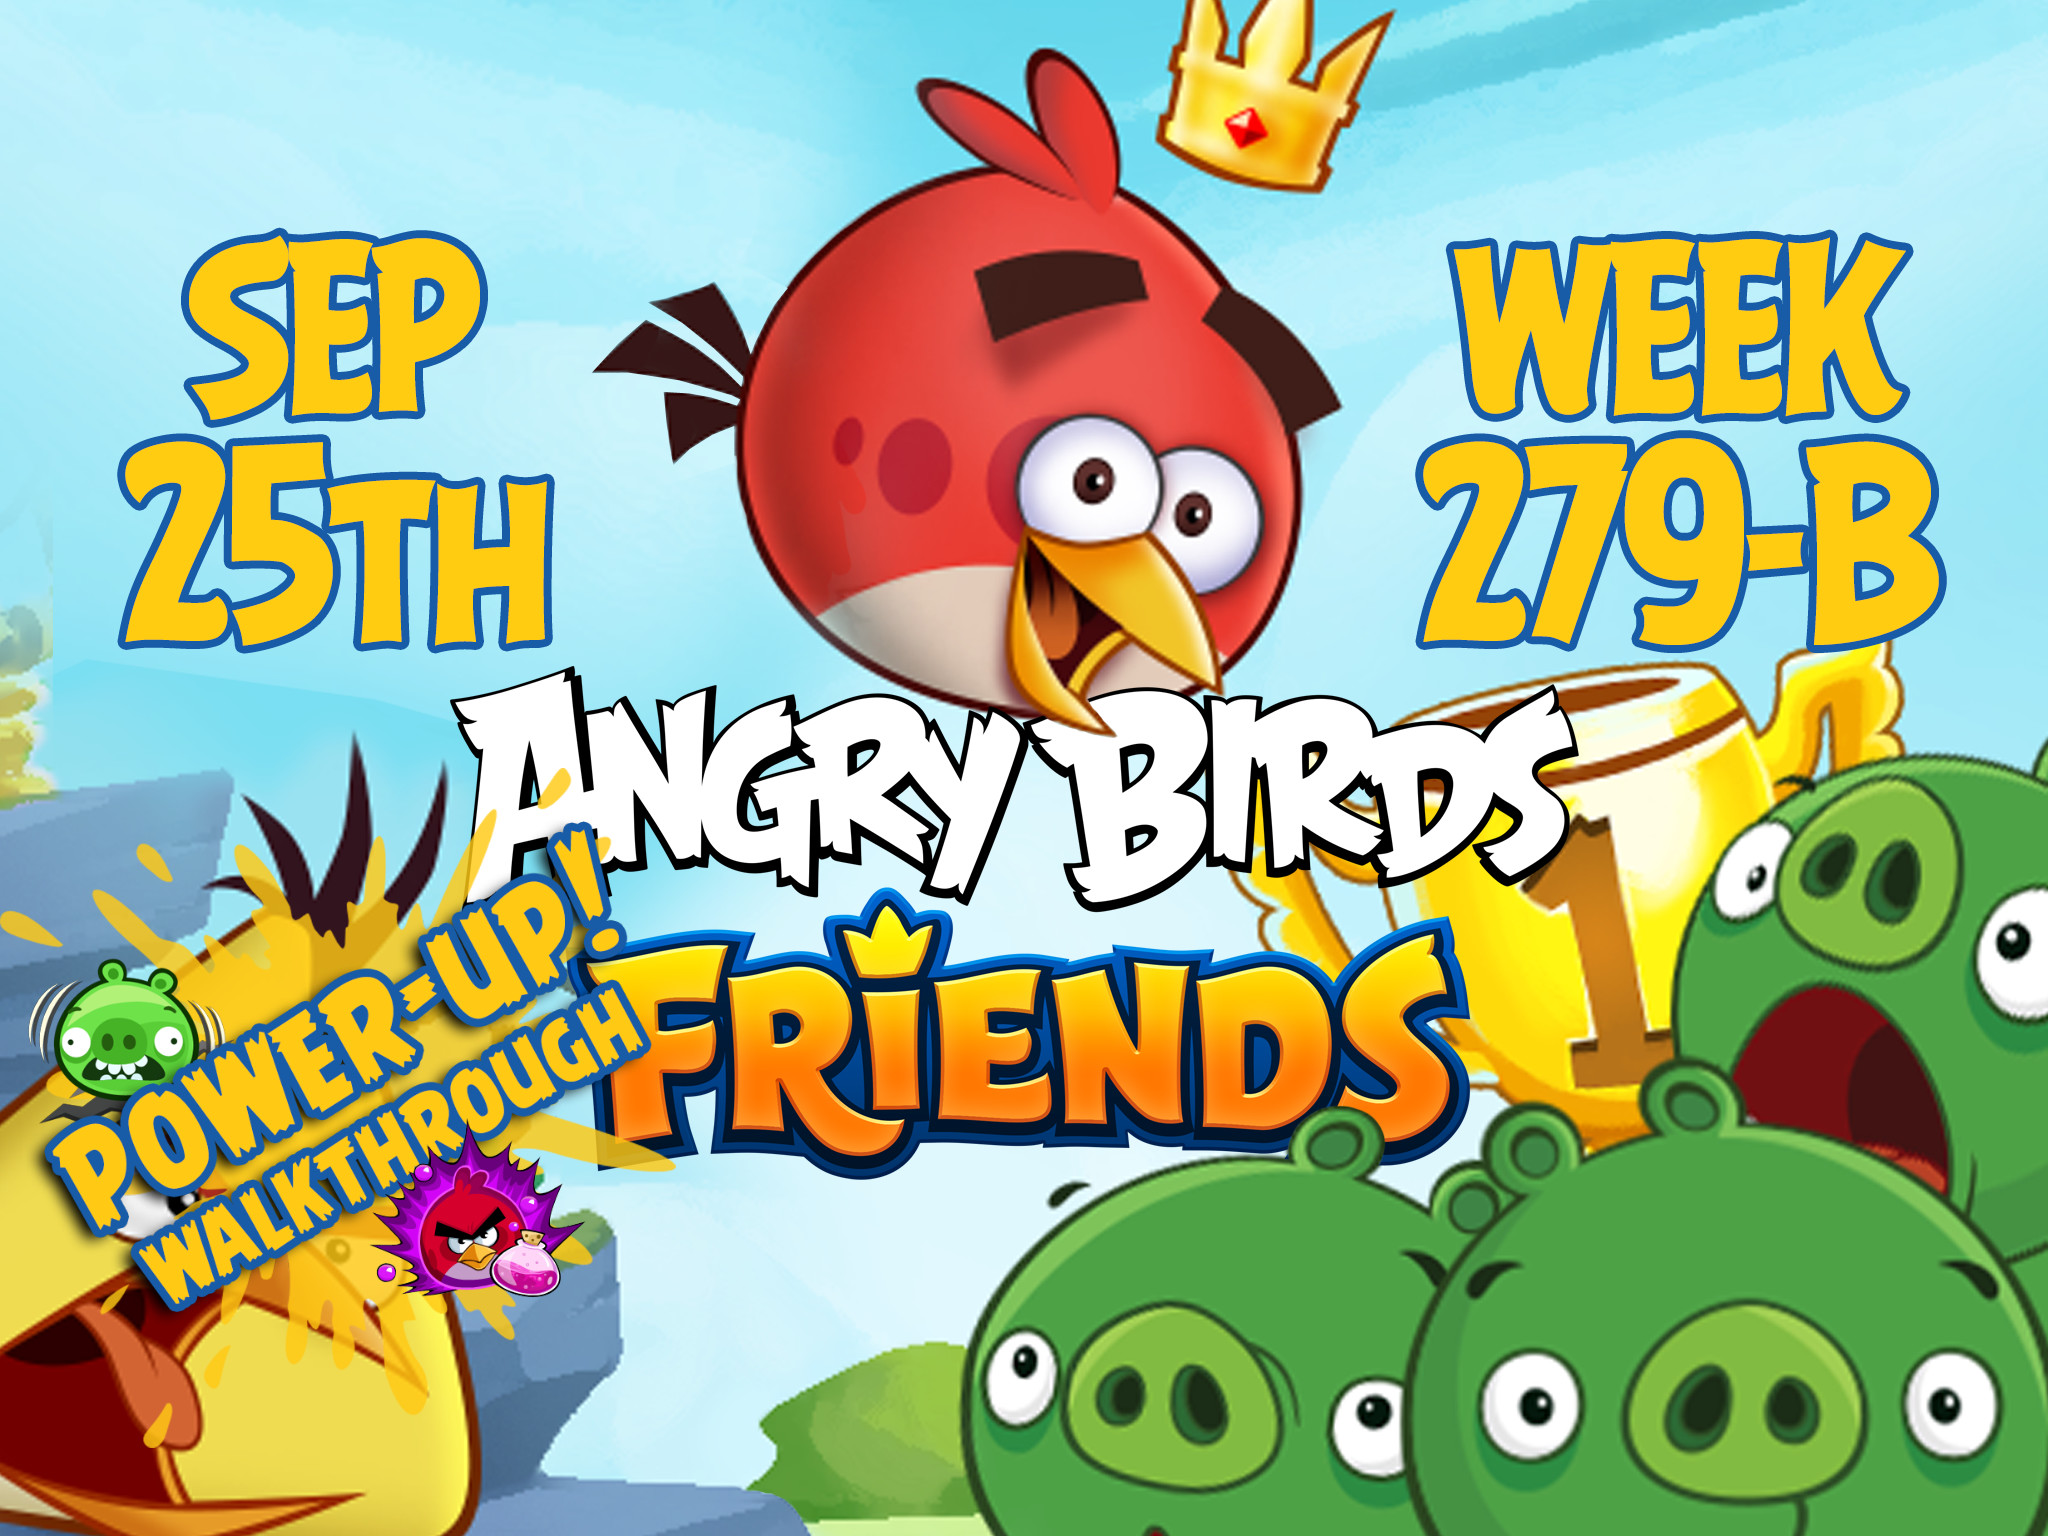 Angry Birds Friends Tournament Week 279-B Feature Image PU